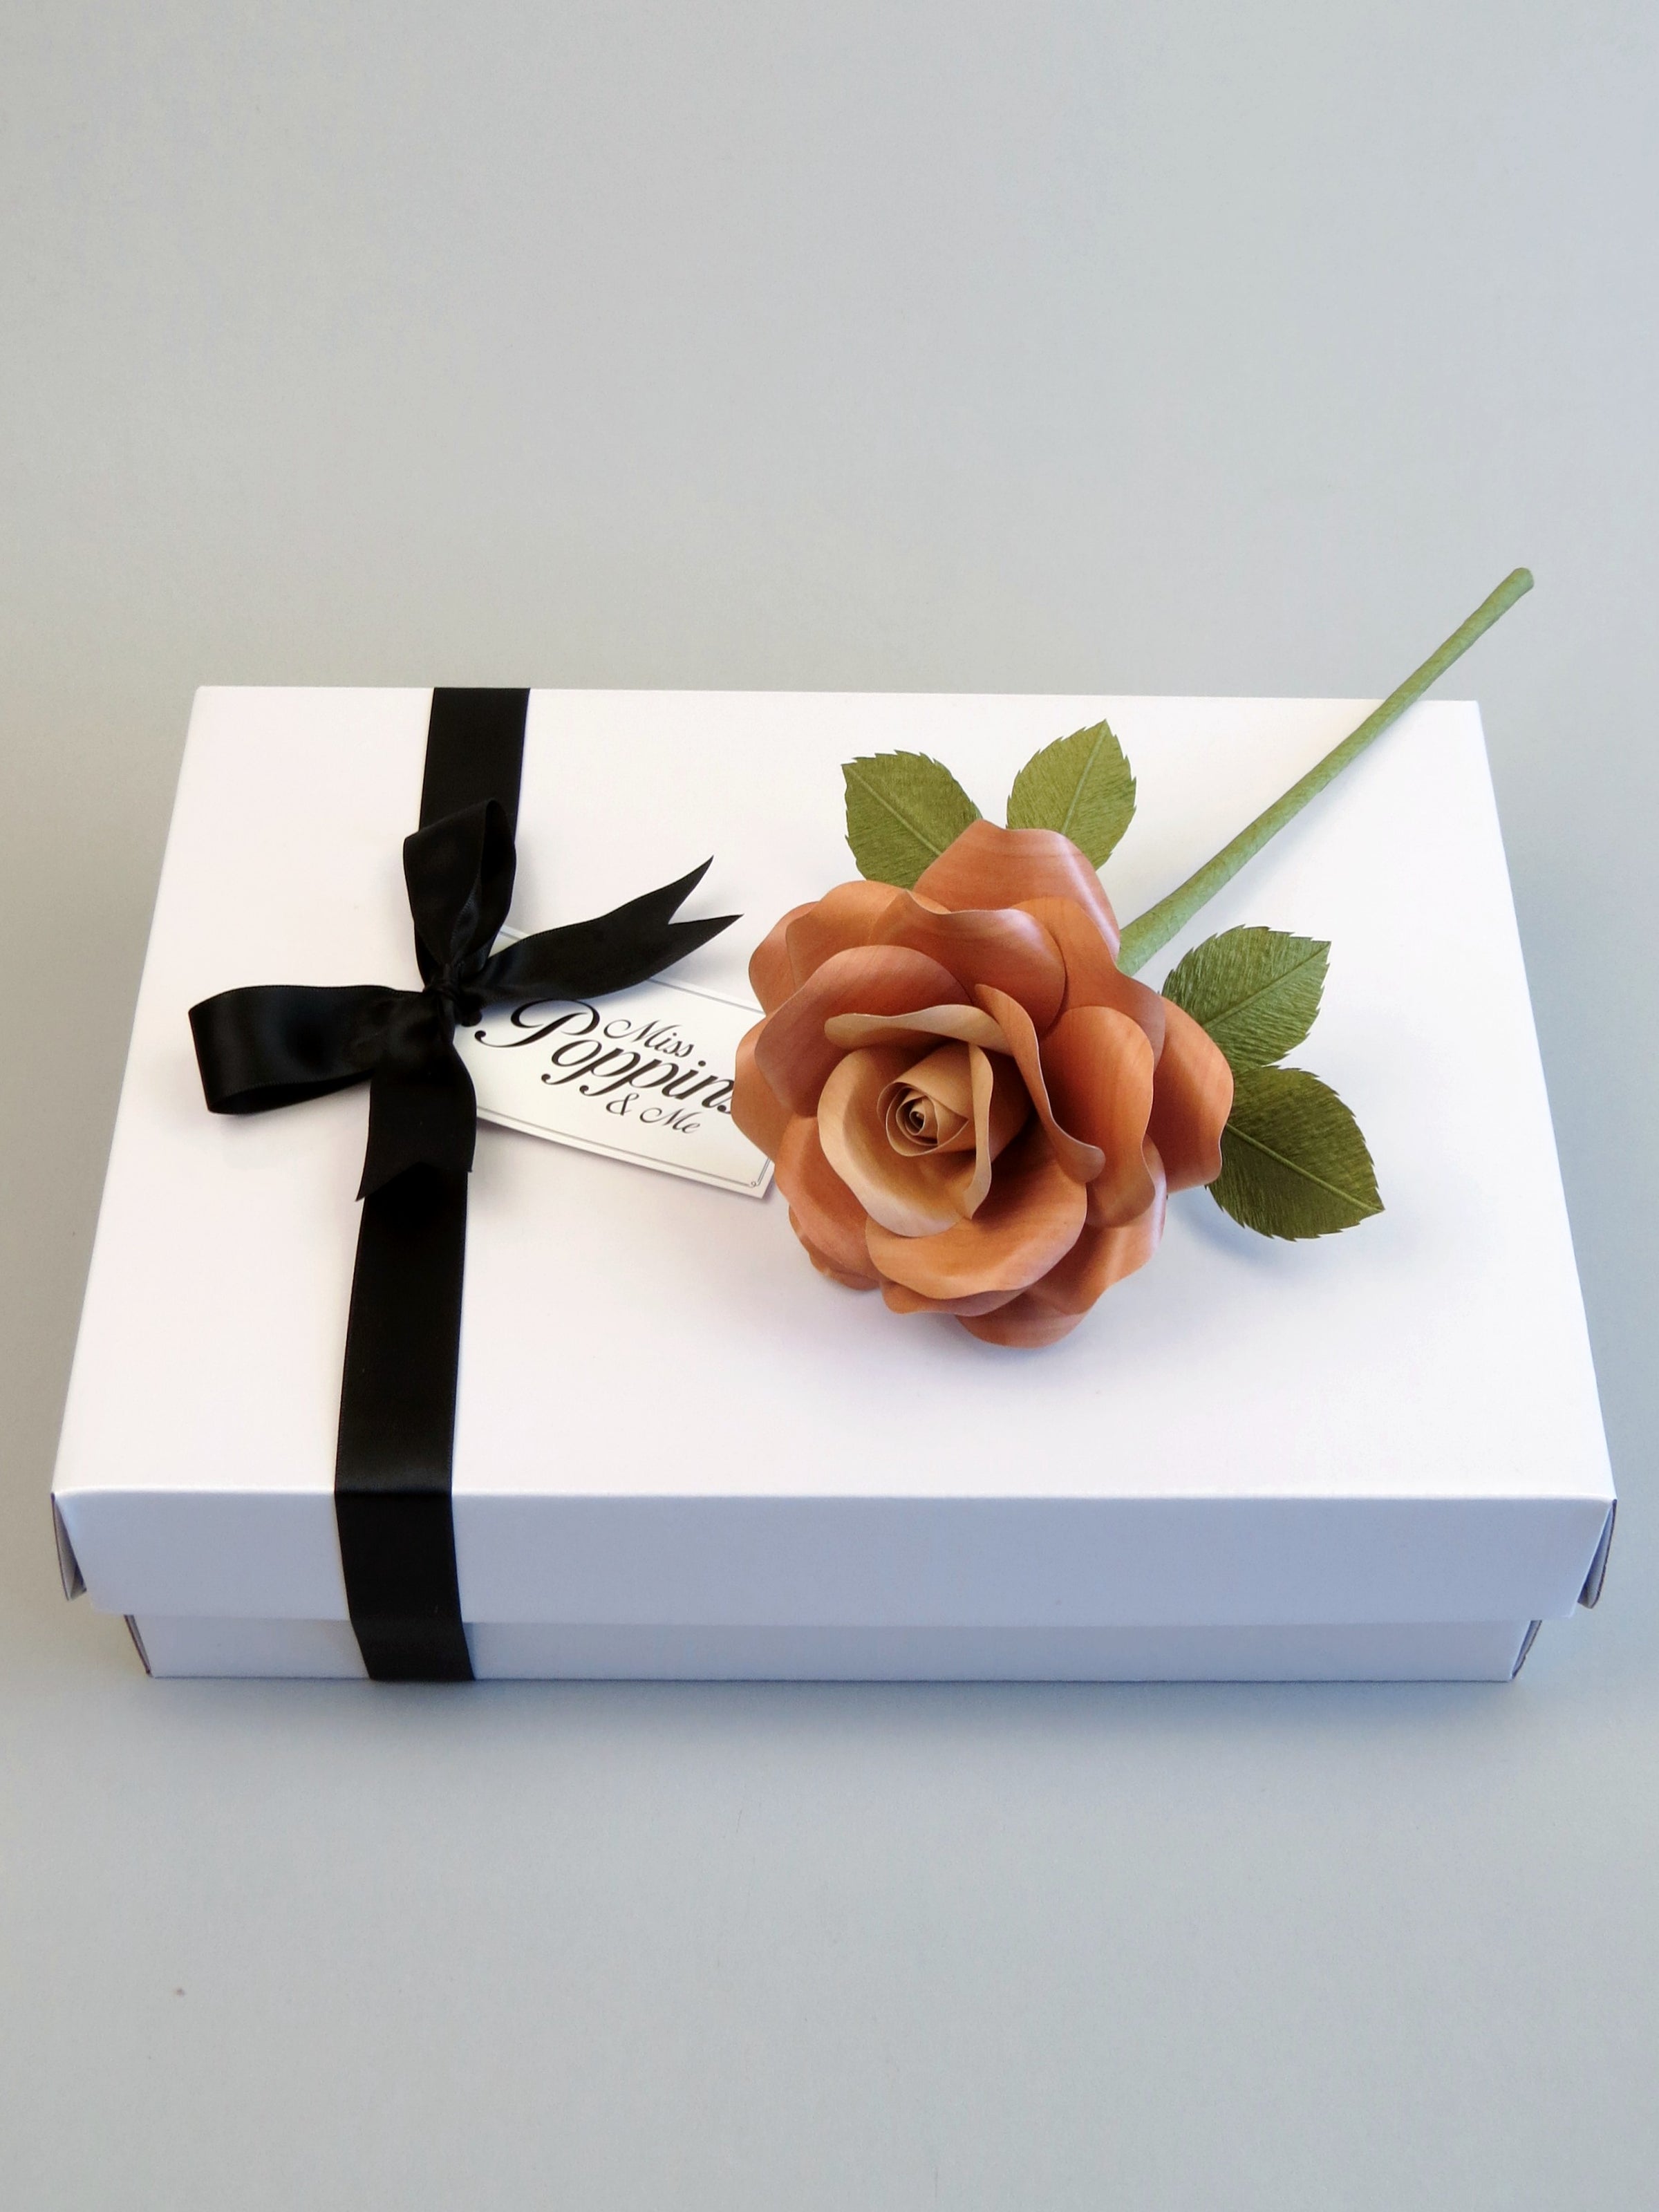 Light brown willow printed paper rose lying on top of a luxury white gift box that has a black satin ribbon tied in a bow with a Miss Poppins and Me gift tag attached